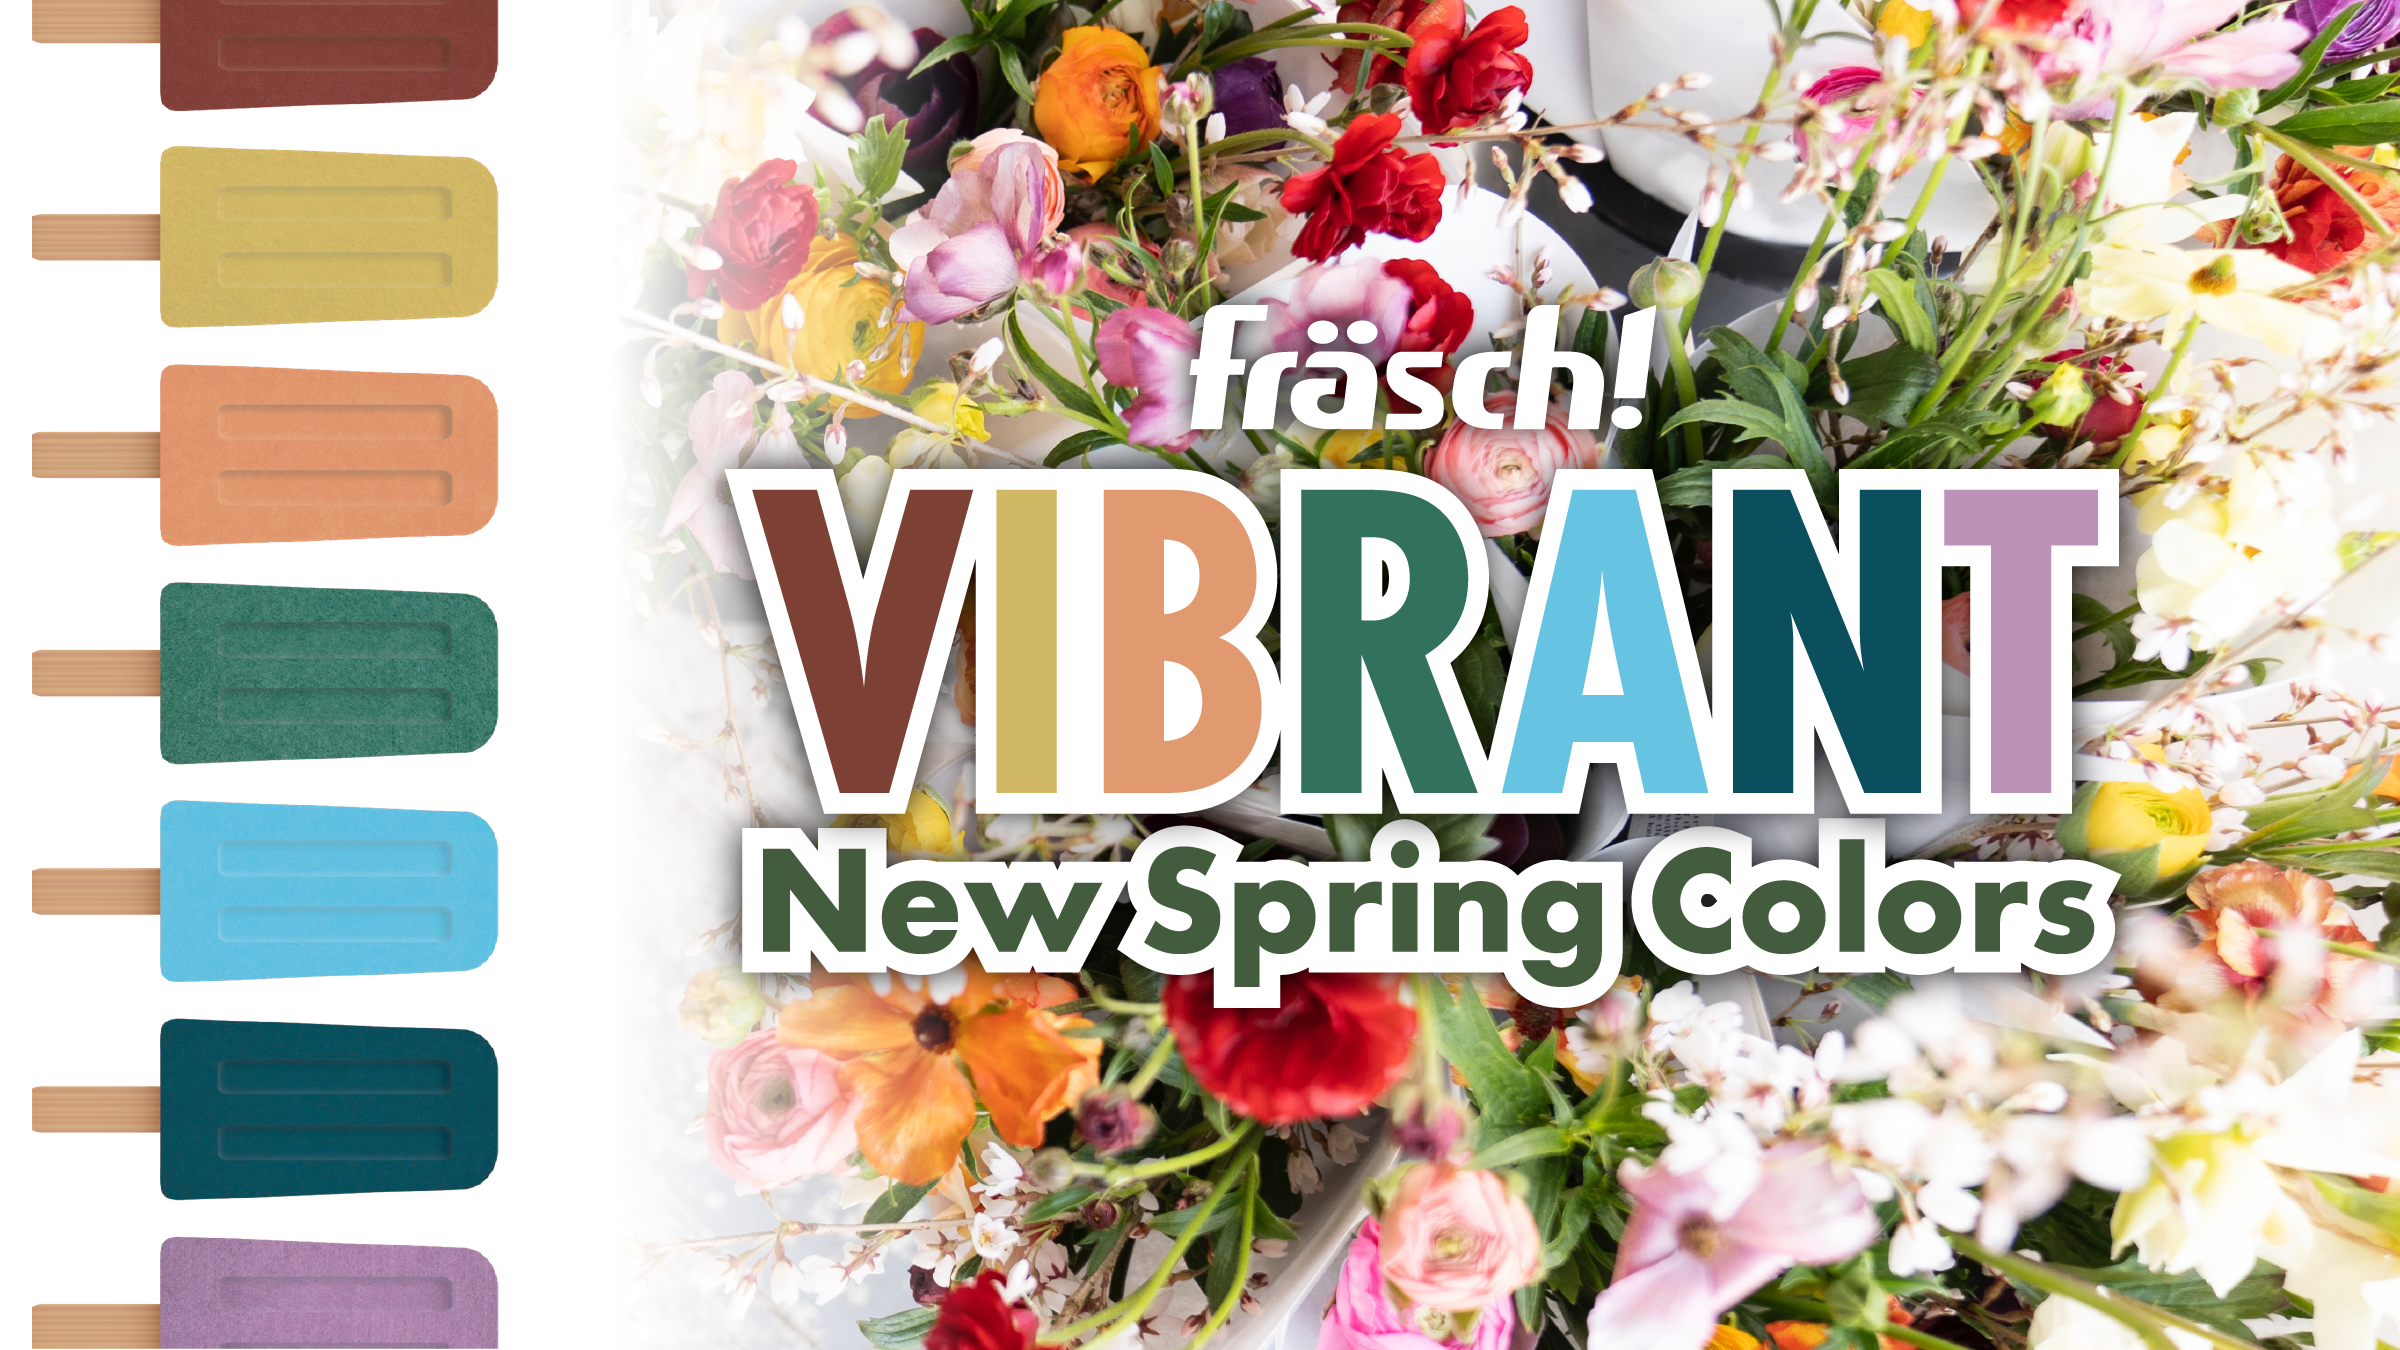 Vibrant New Spring Colors from Frasch